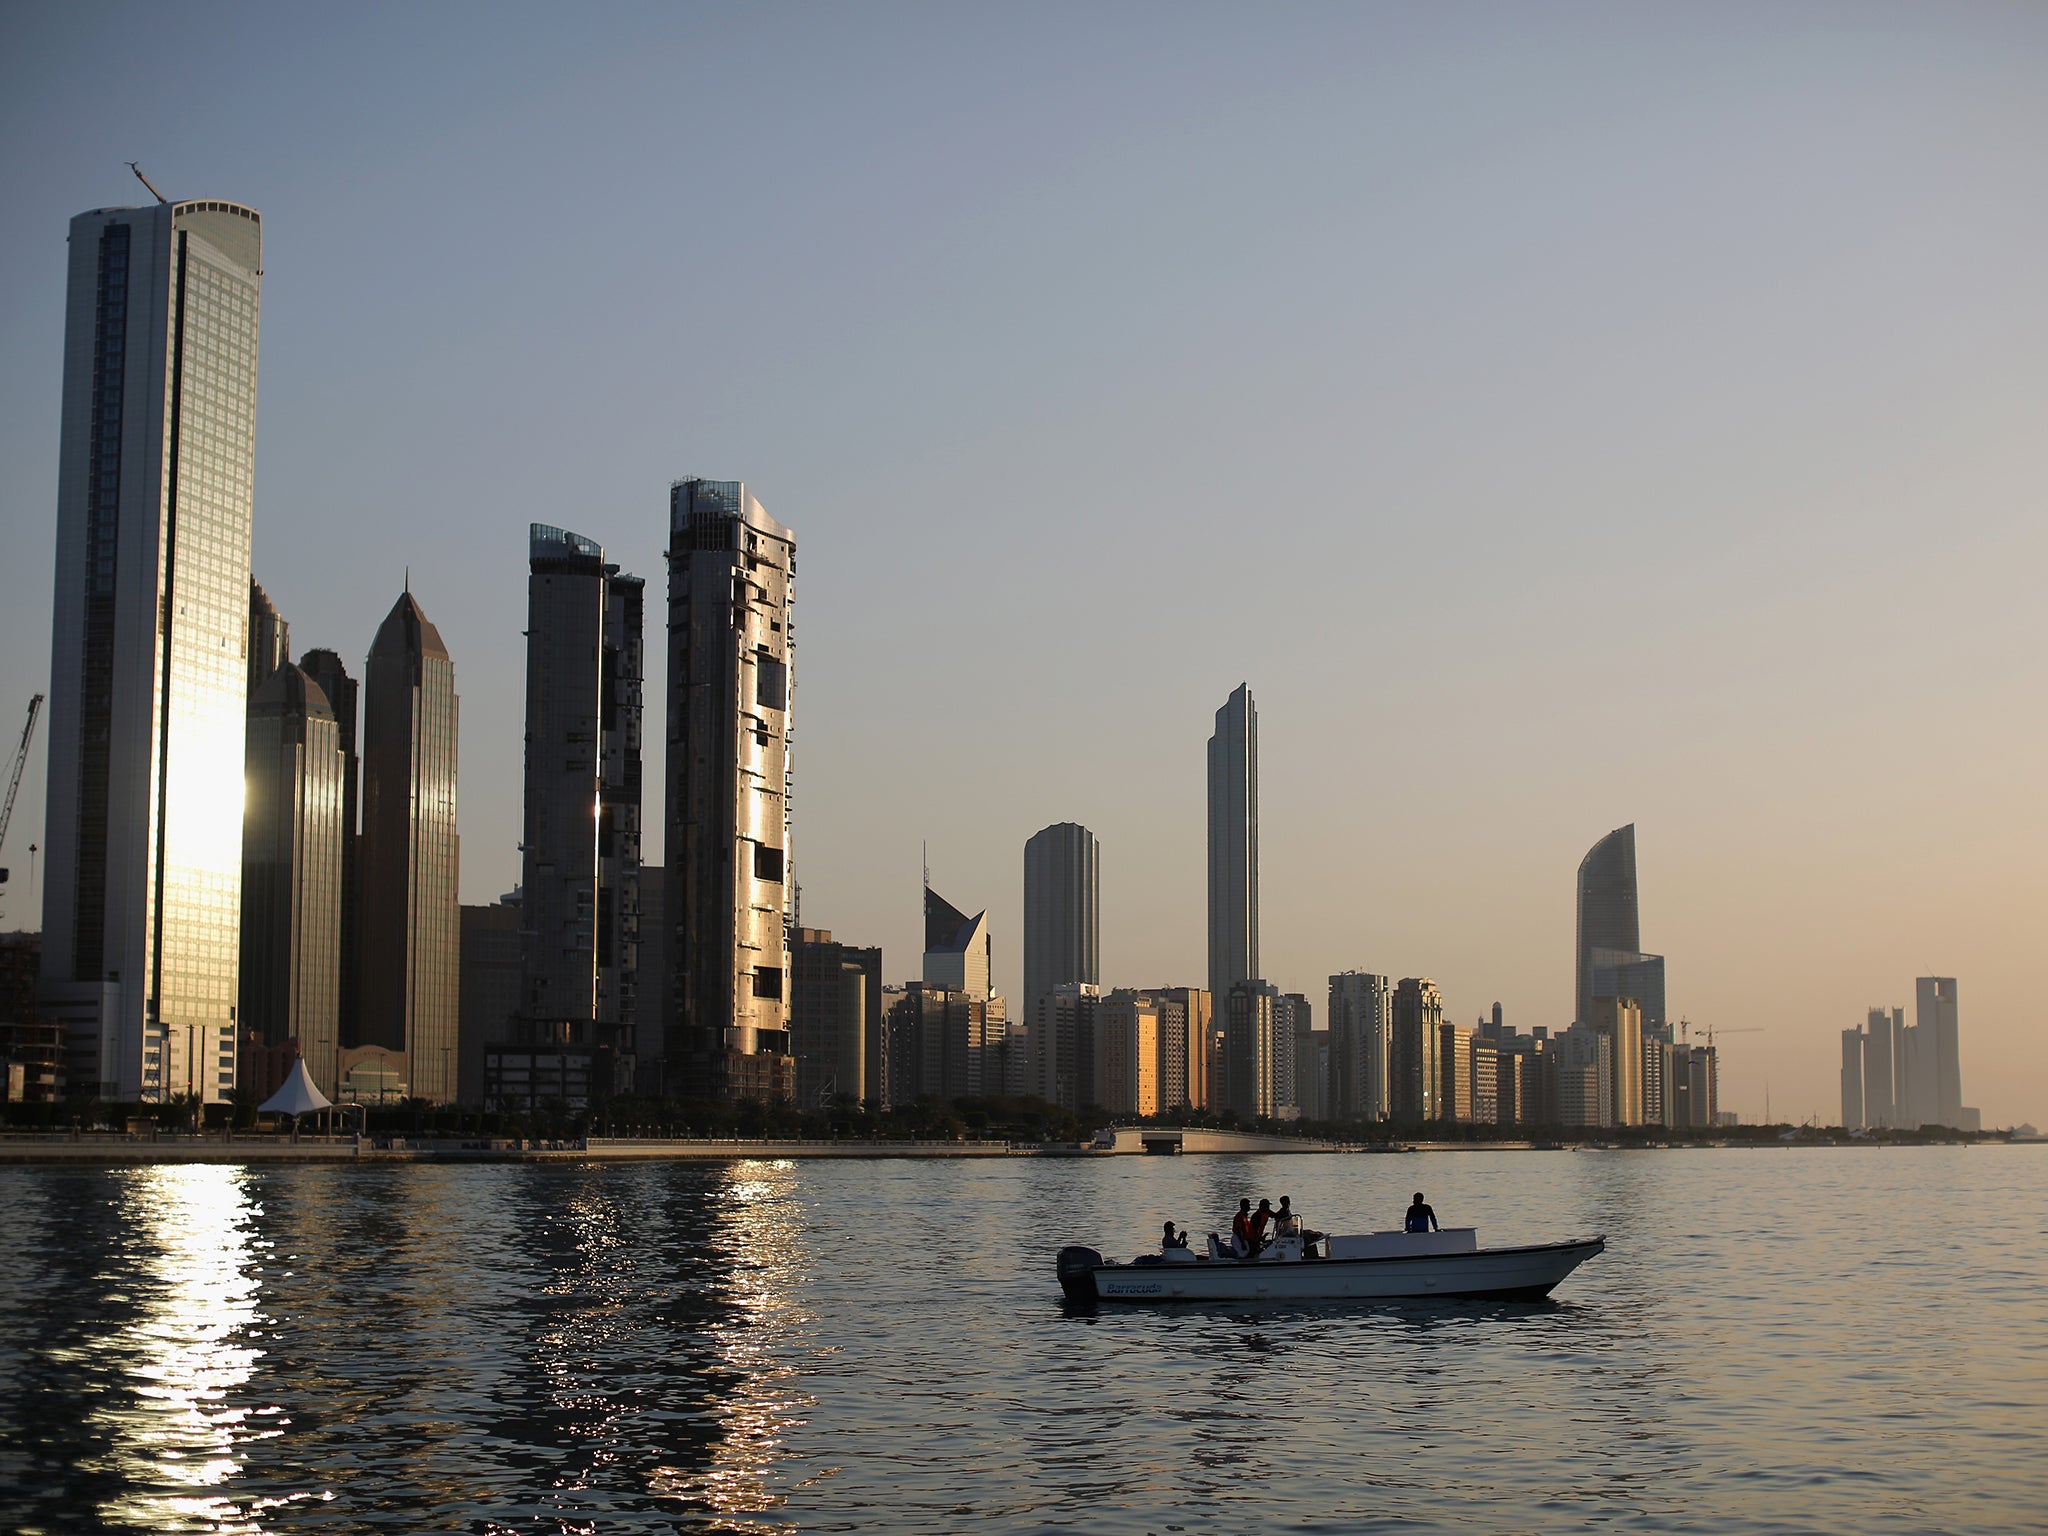 The city skyline at sunset from Dhow Harbour in Abu Dhabi